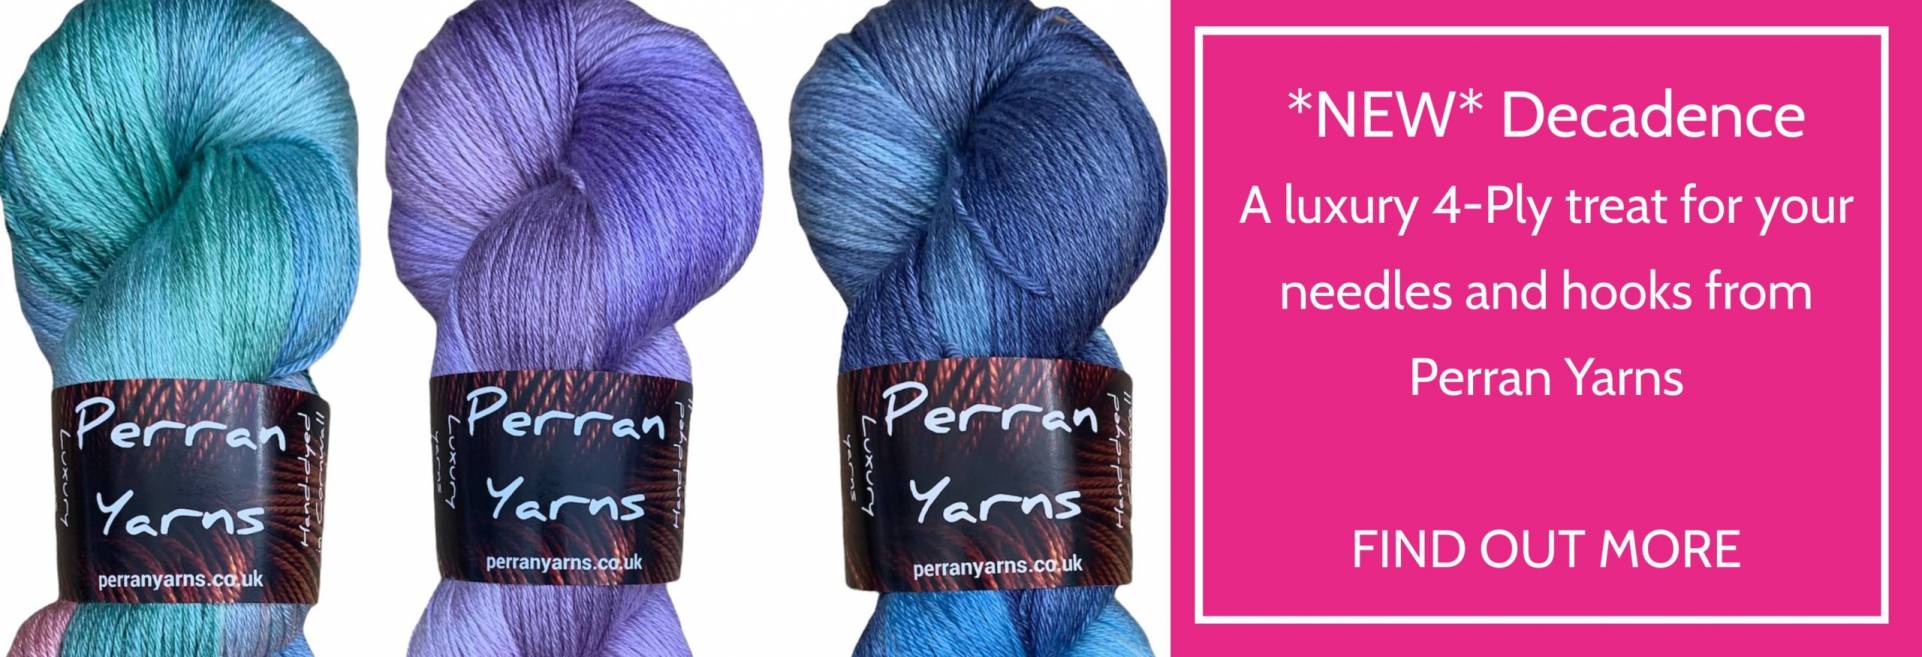 Perran Yarns Decadence Home Page Banner